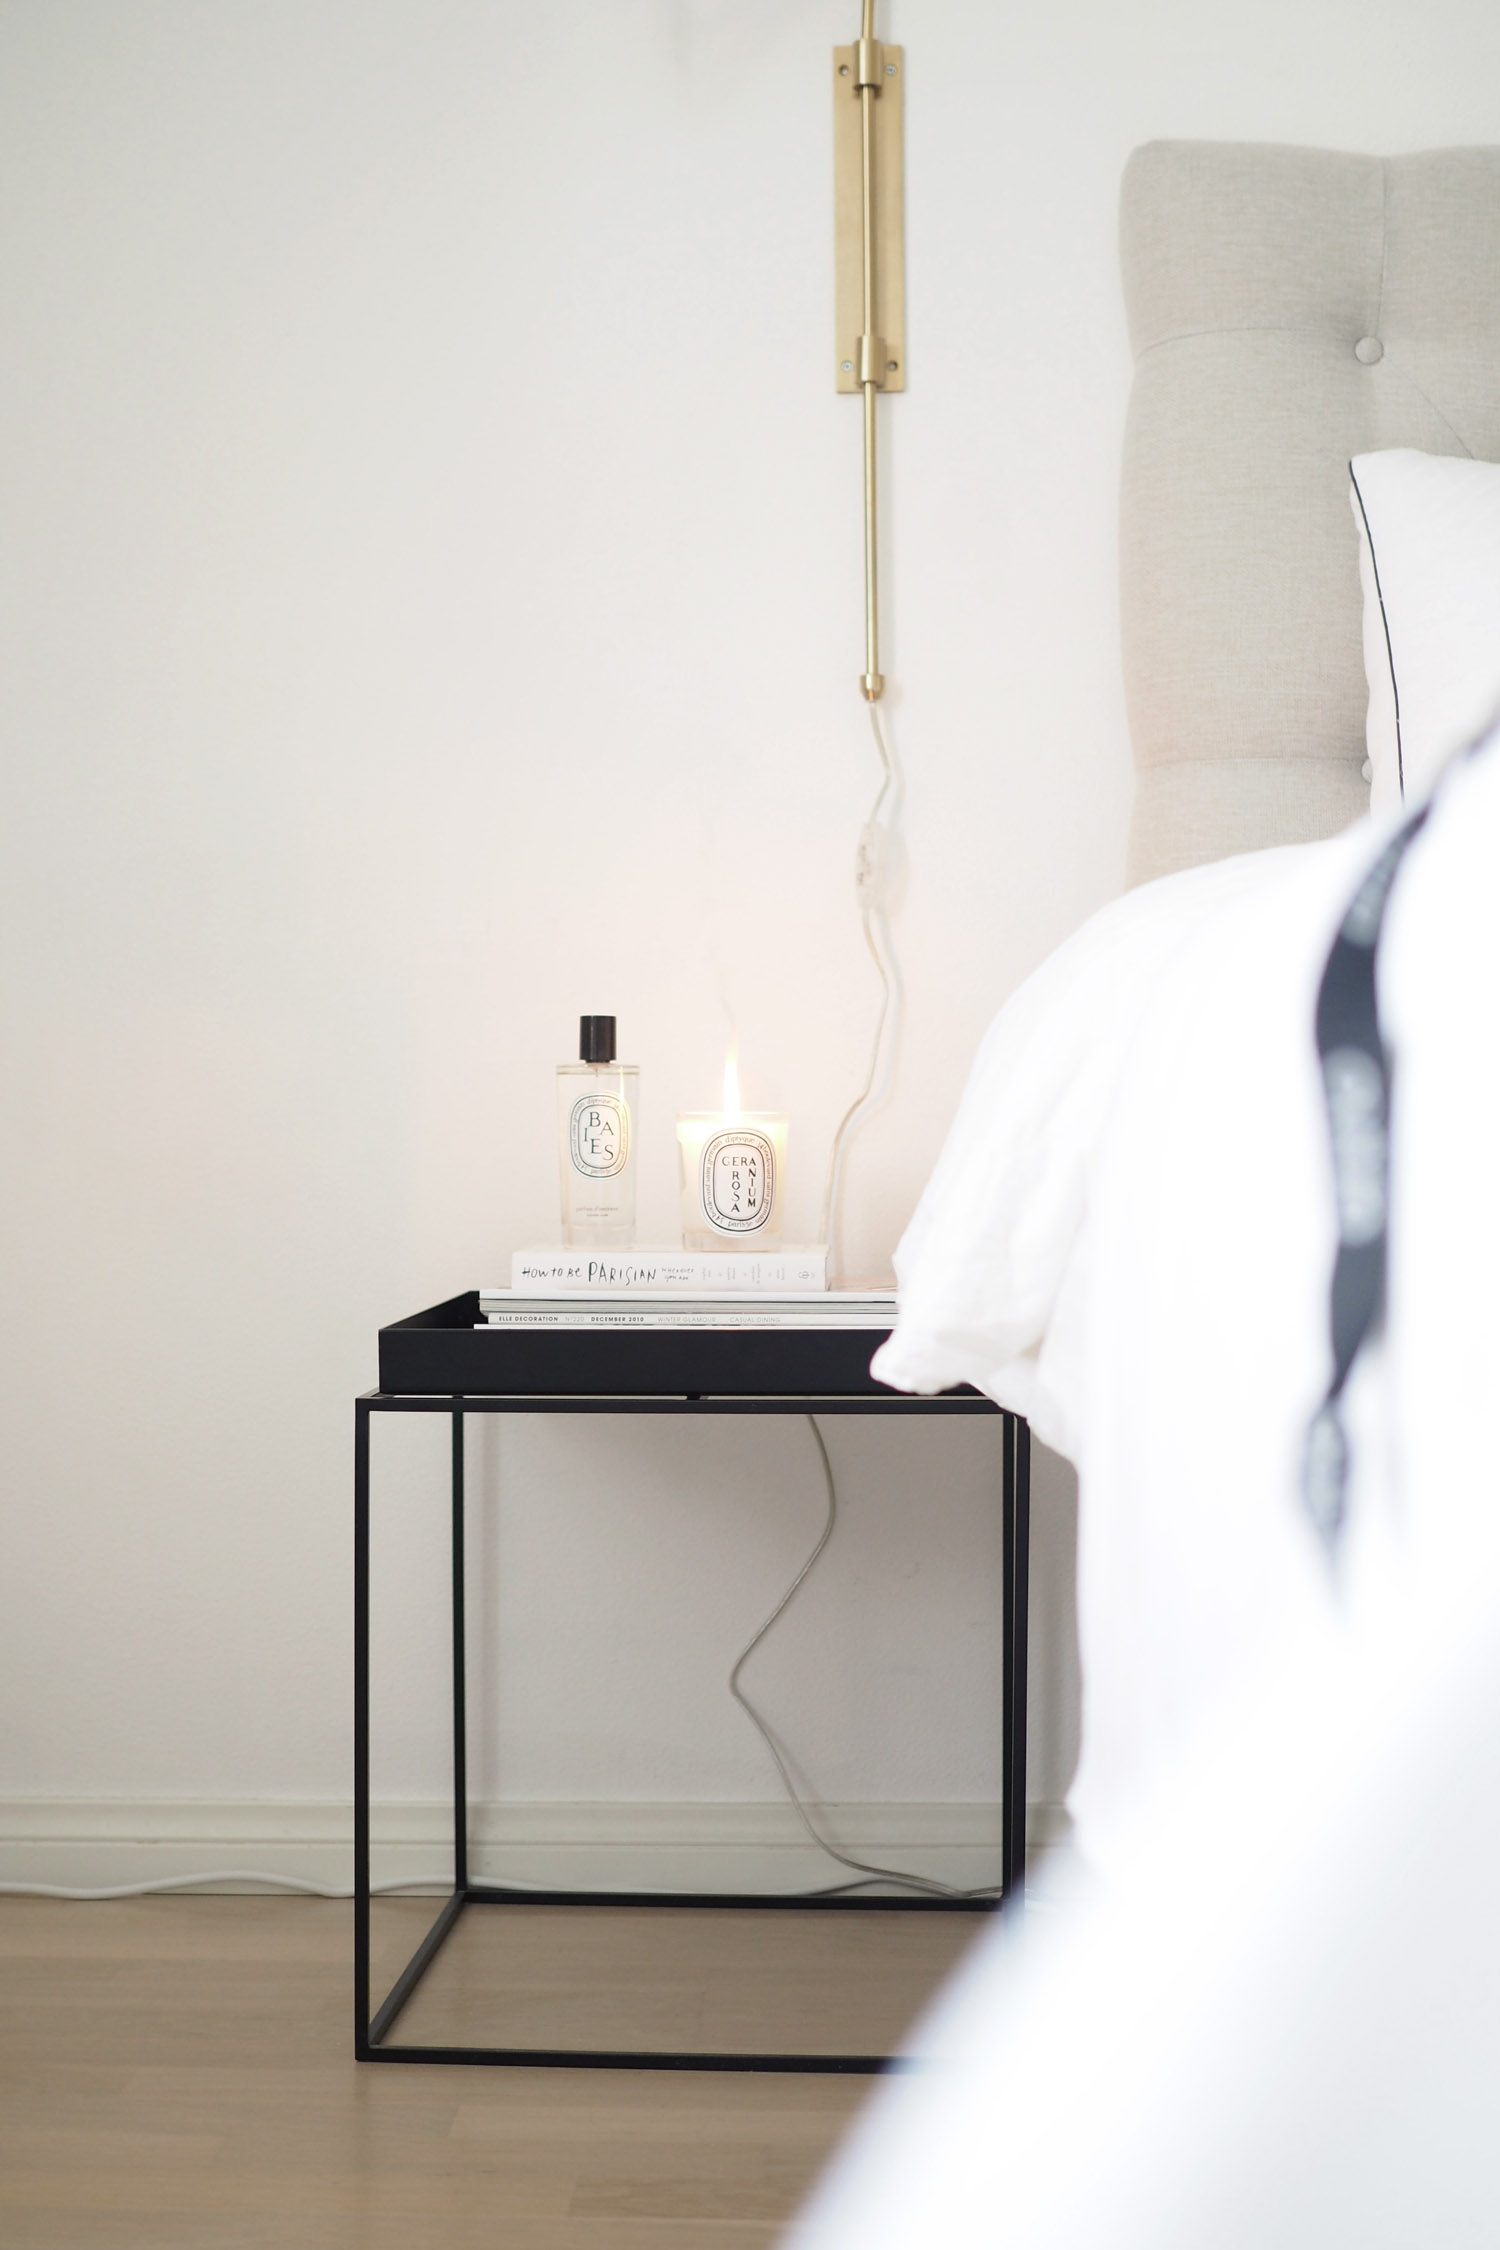 Char and the city - White, classic and Scandinavian bedroom - read more on the blog: //www.idealista.fi/charandthecity/2016/08/30/suuri-makuuhuone-postaus #bedroom #interior #white #apartment #scandinavian #trademax #housedoctor #balmuir #hay #diptyque